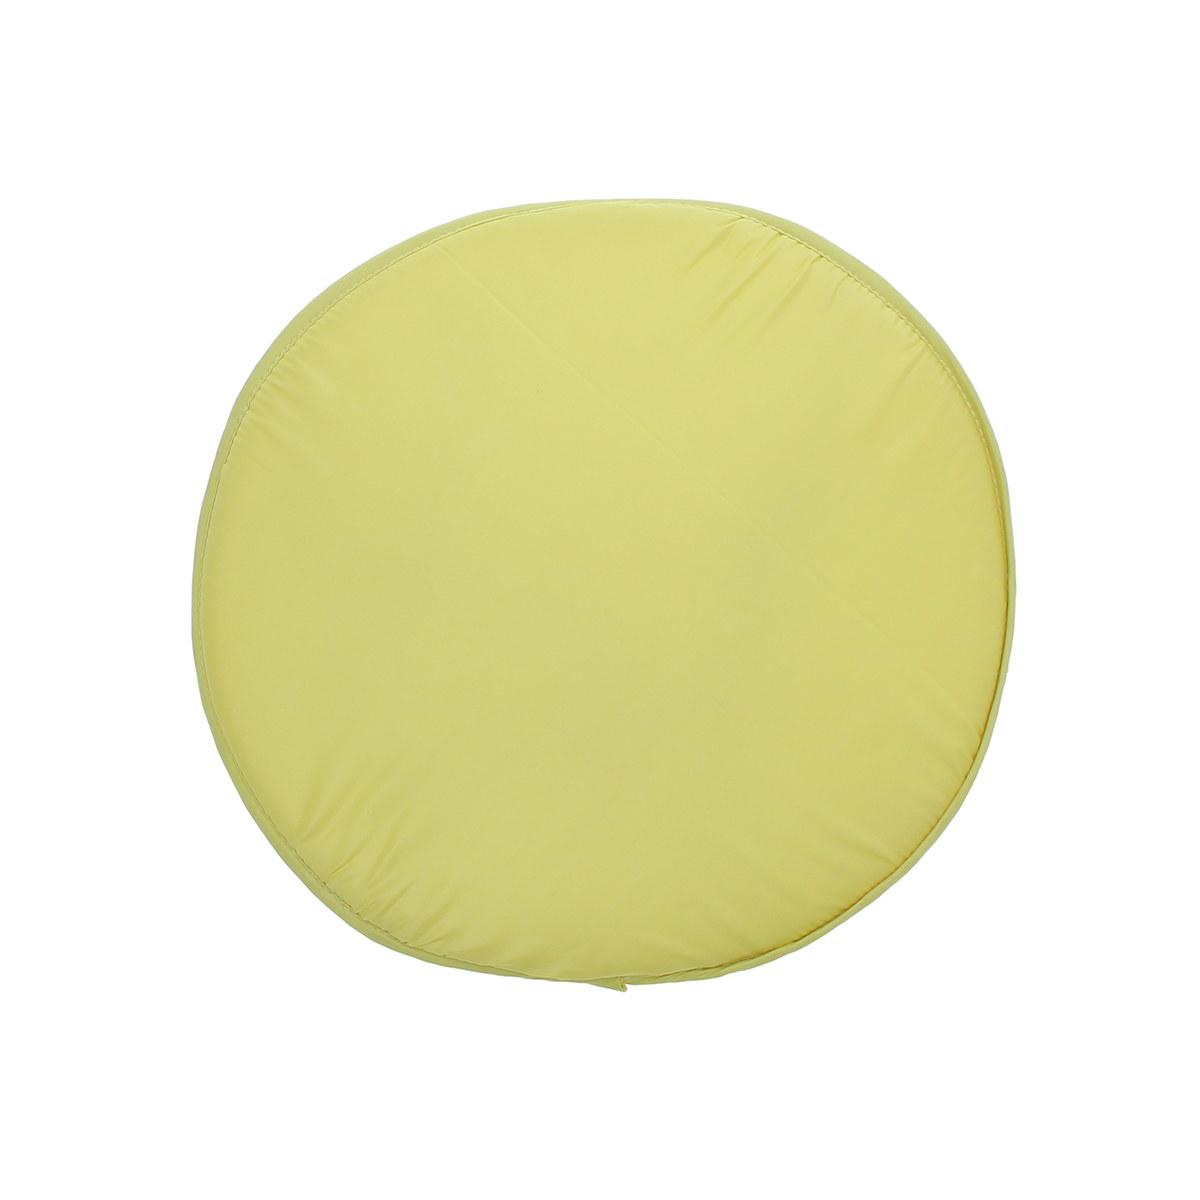 38*38Cm Multicolor round Circular Seat Pads Chair Cushion Garden Kitchen Dining Multipurpose Removable